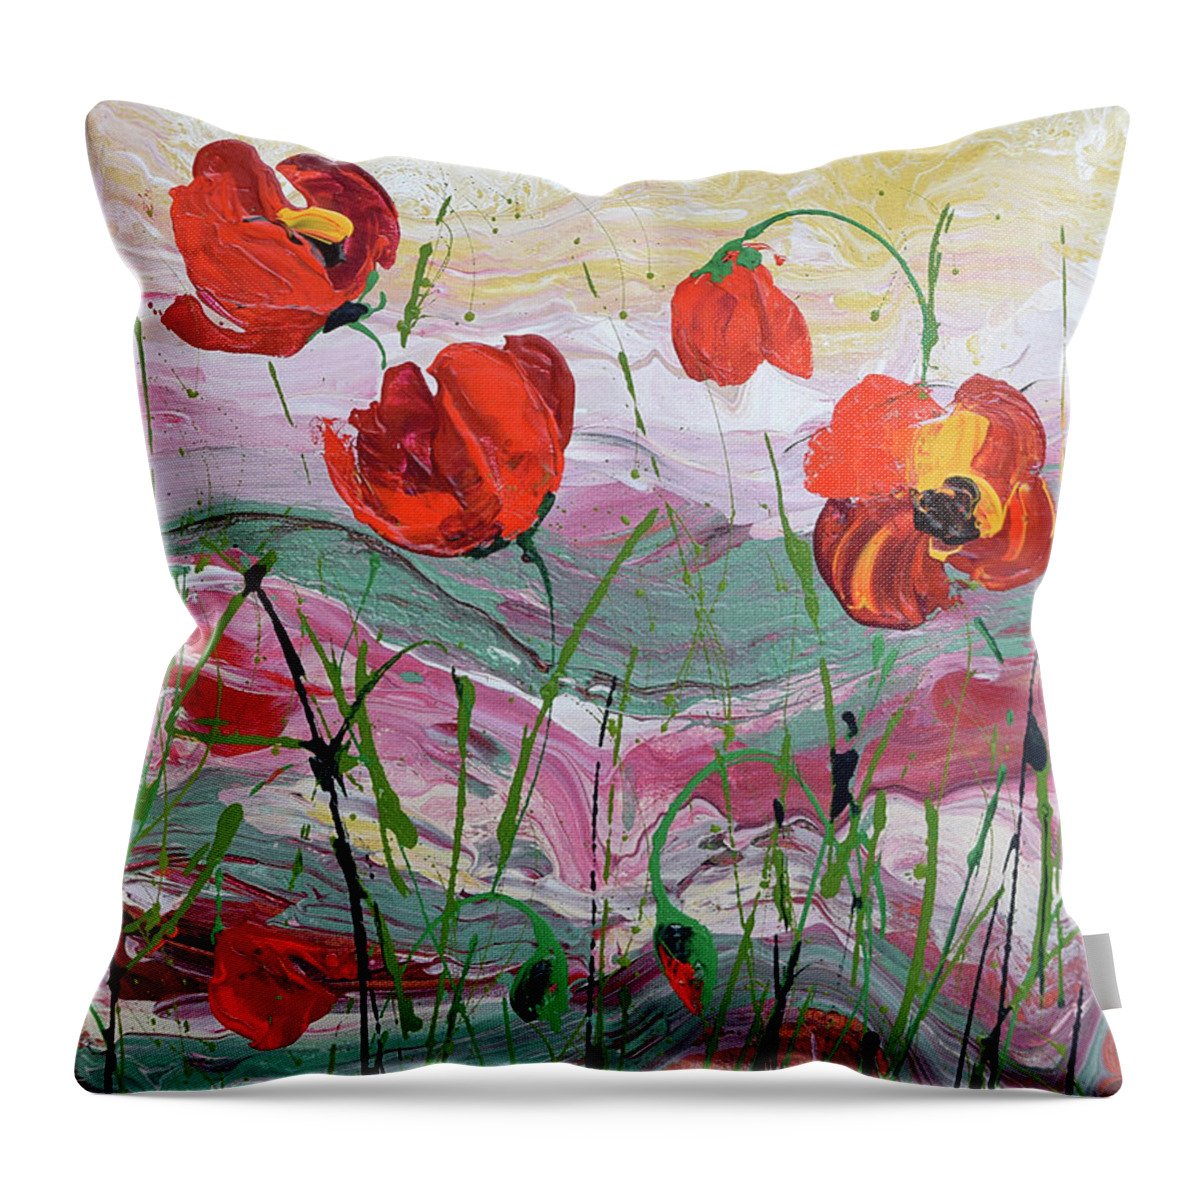 Wild Poppies - Triptych Throw Pillow featuring the painting Wild Poppies - 2 by Jyotika Shroff